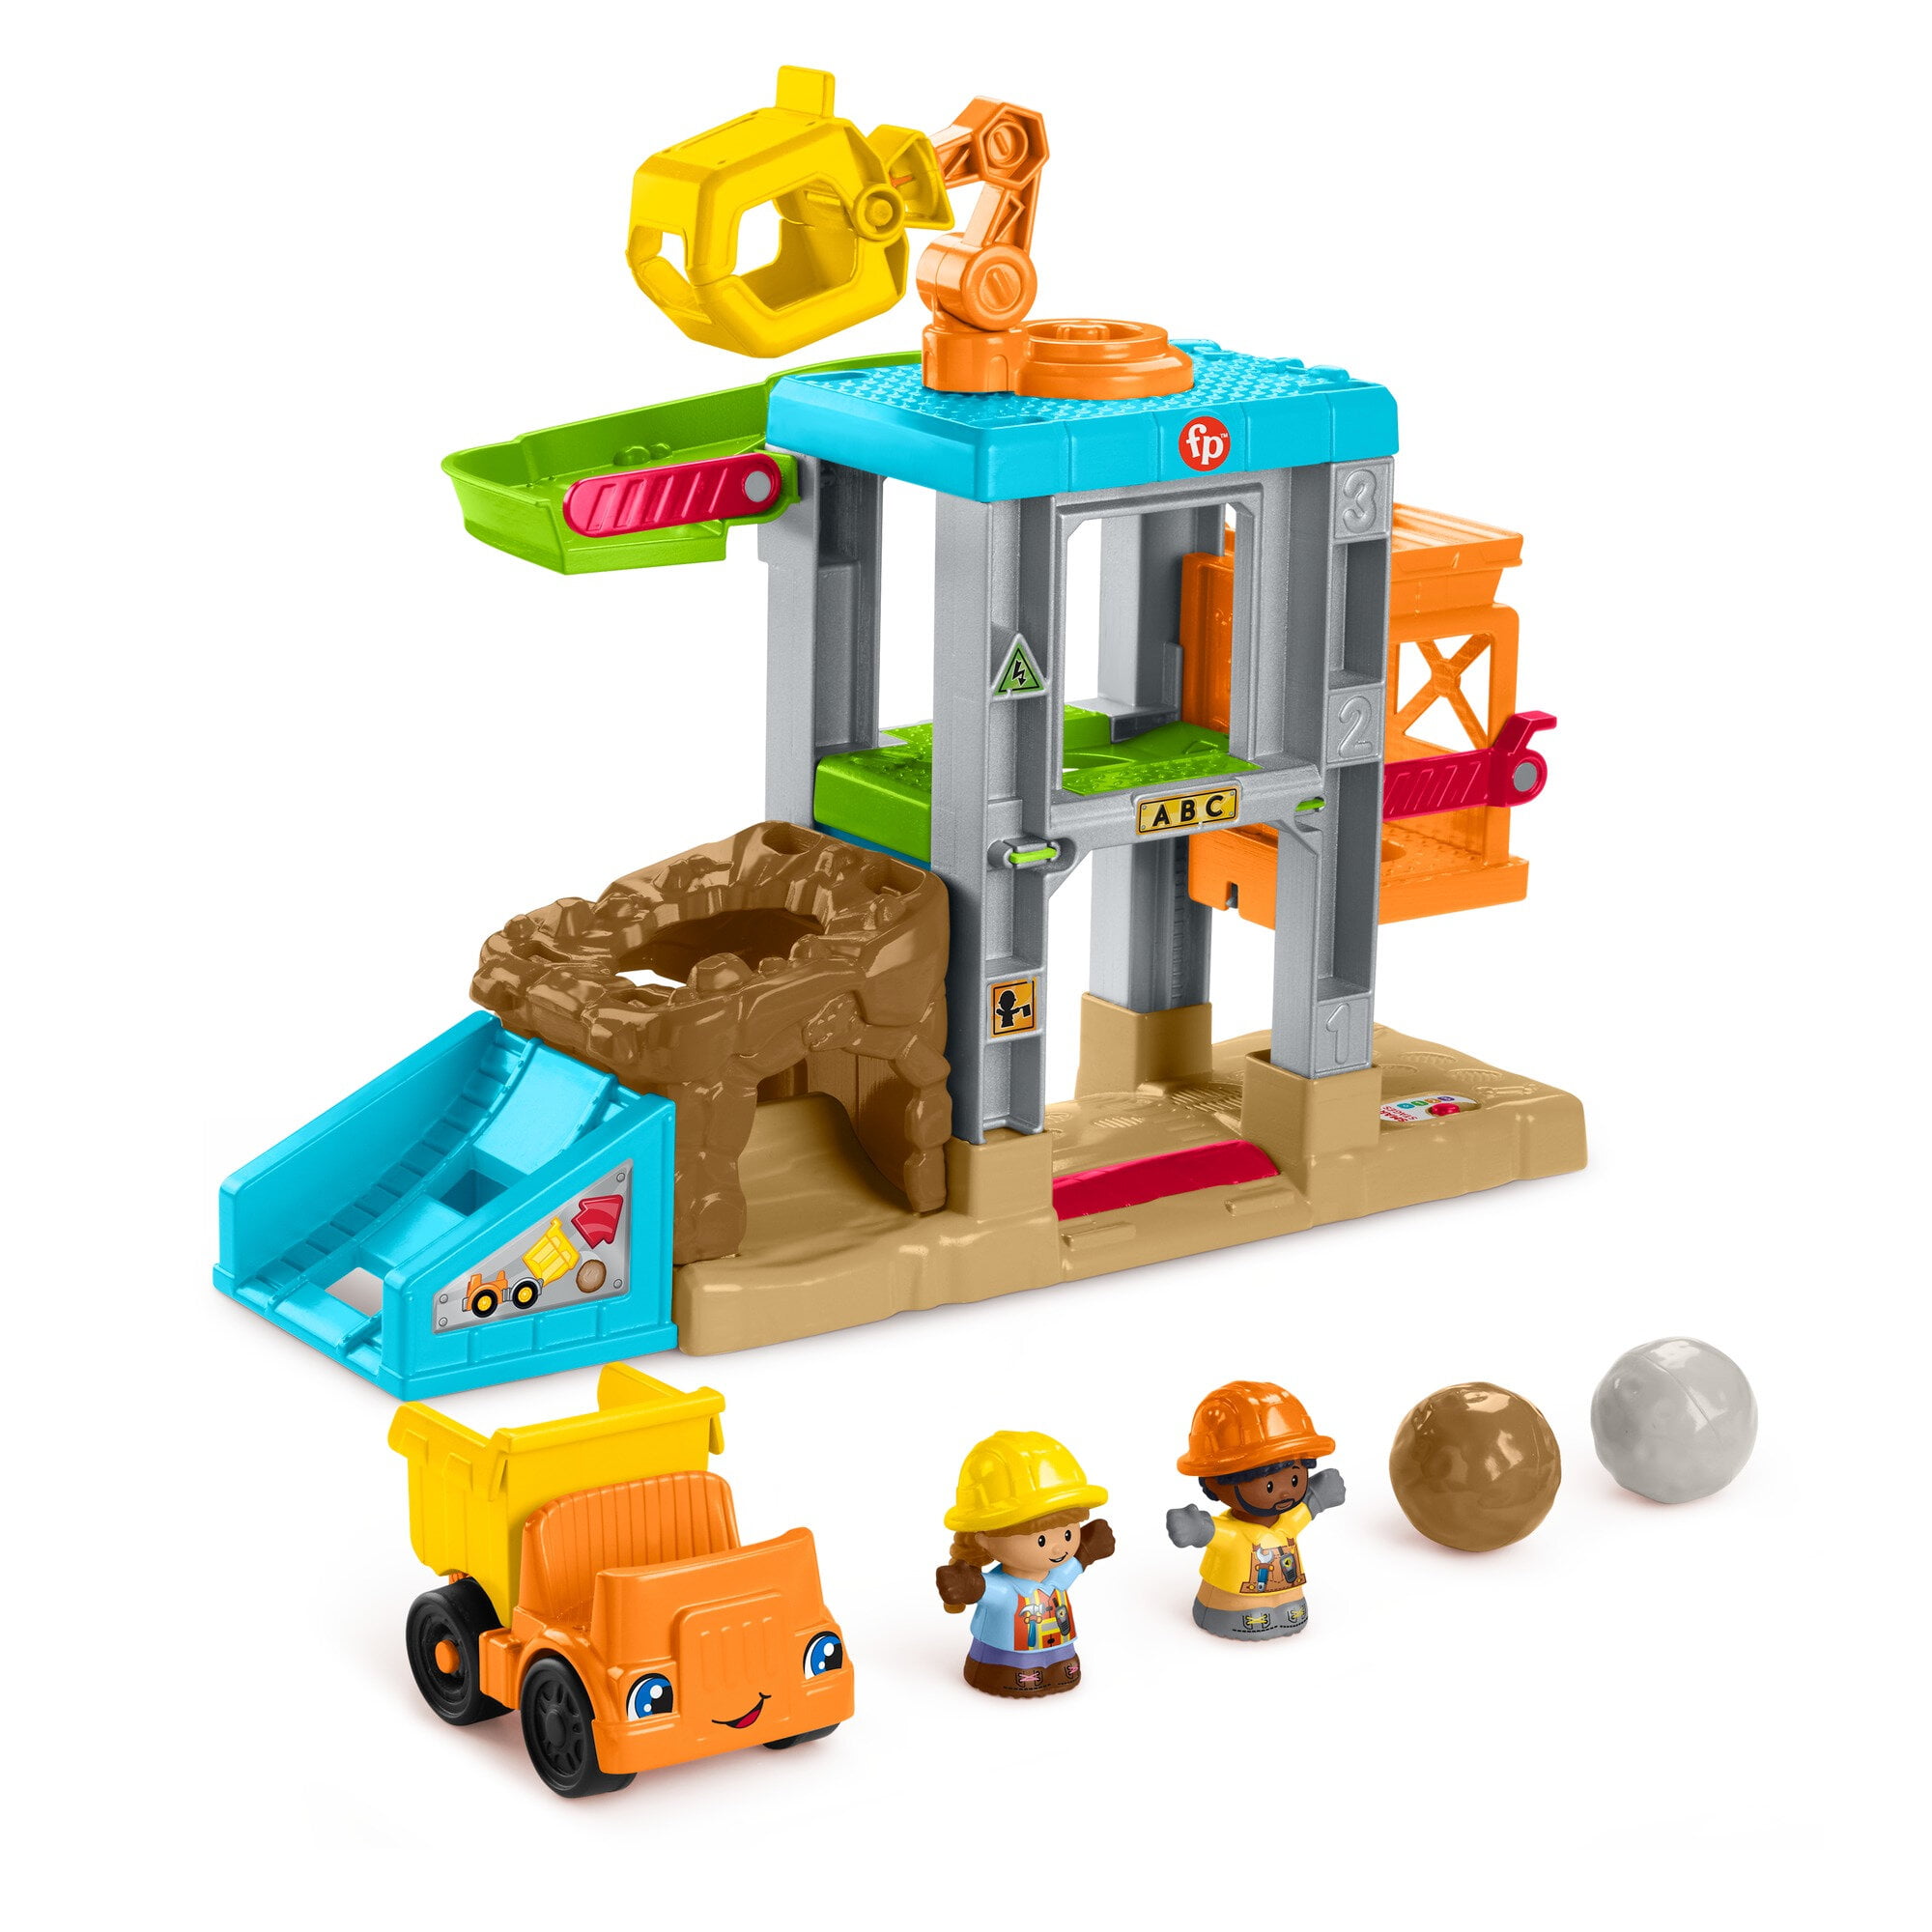 Little People Load Up ‘N Learn Construction Site Playset